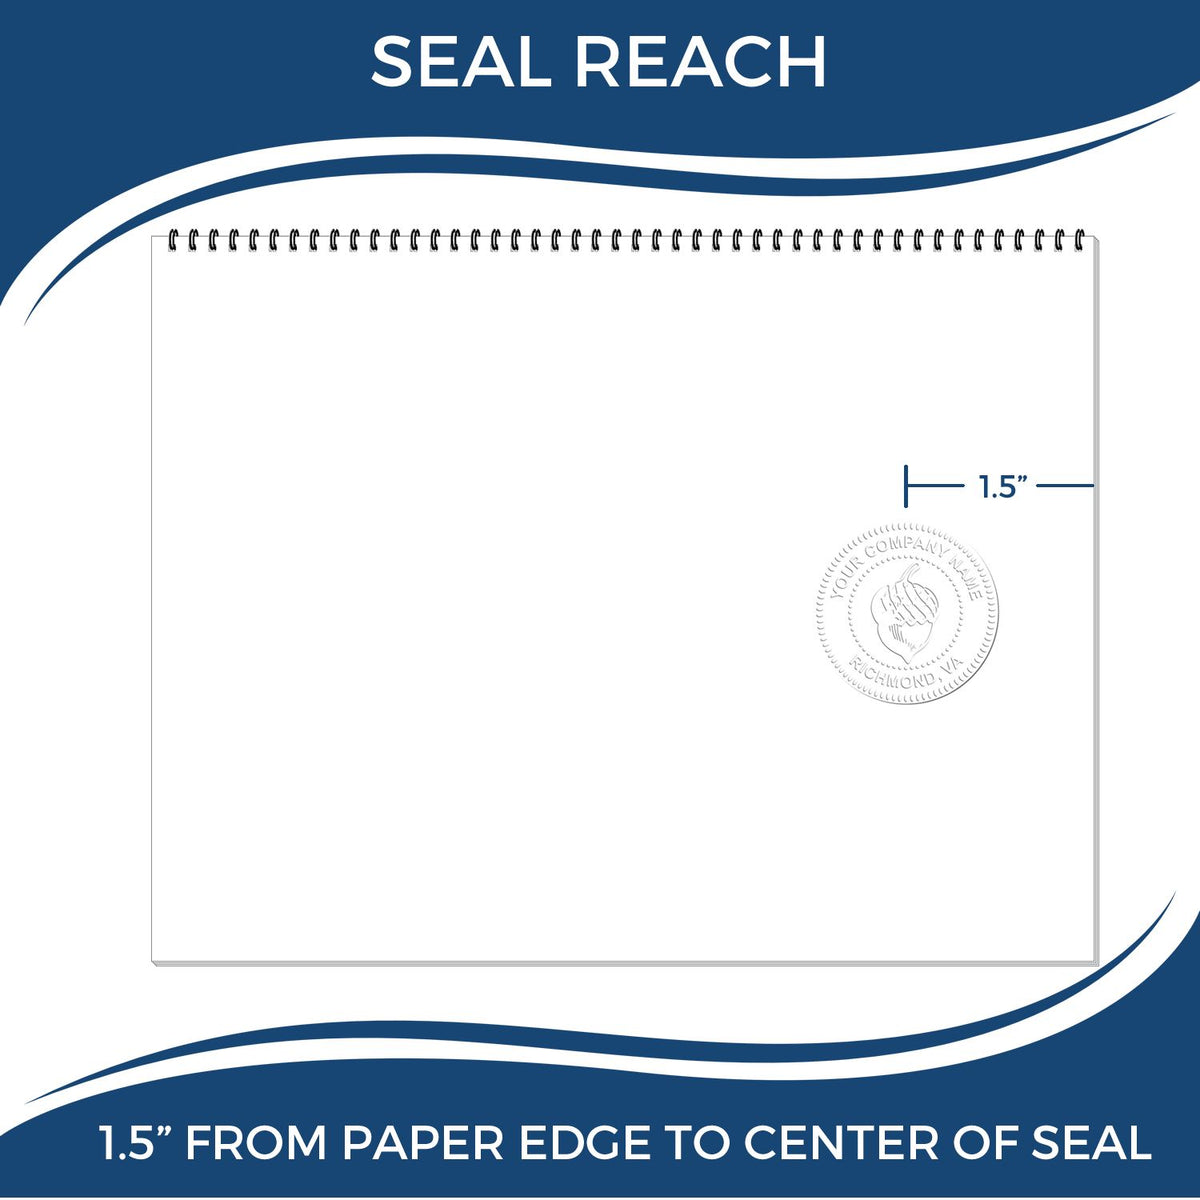 An infographic showing the seal reach which is represented by a ruler and a miniature seal image of the Soft North Dakota Professional Engineer Seal